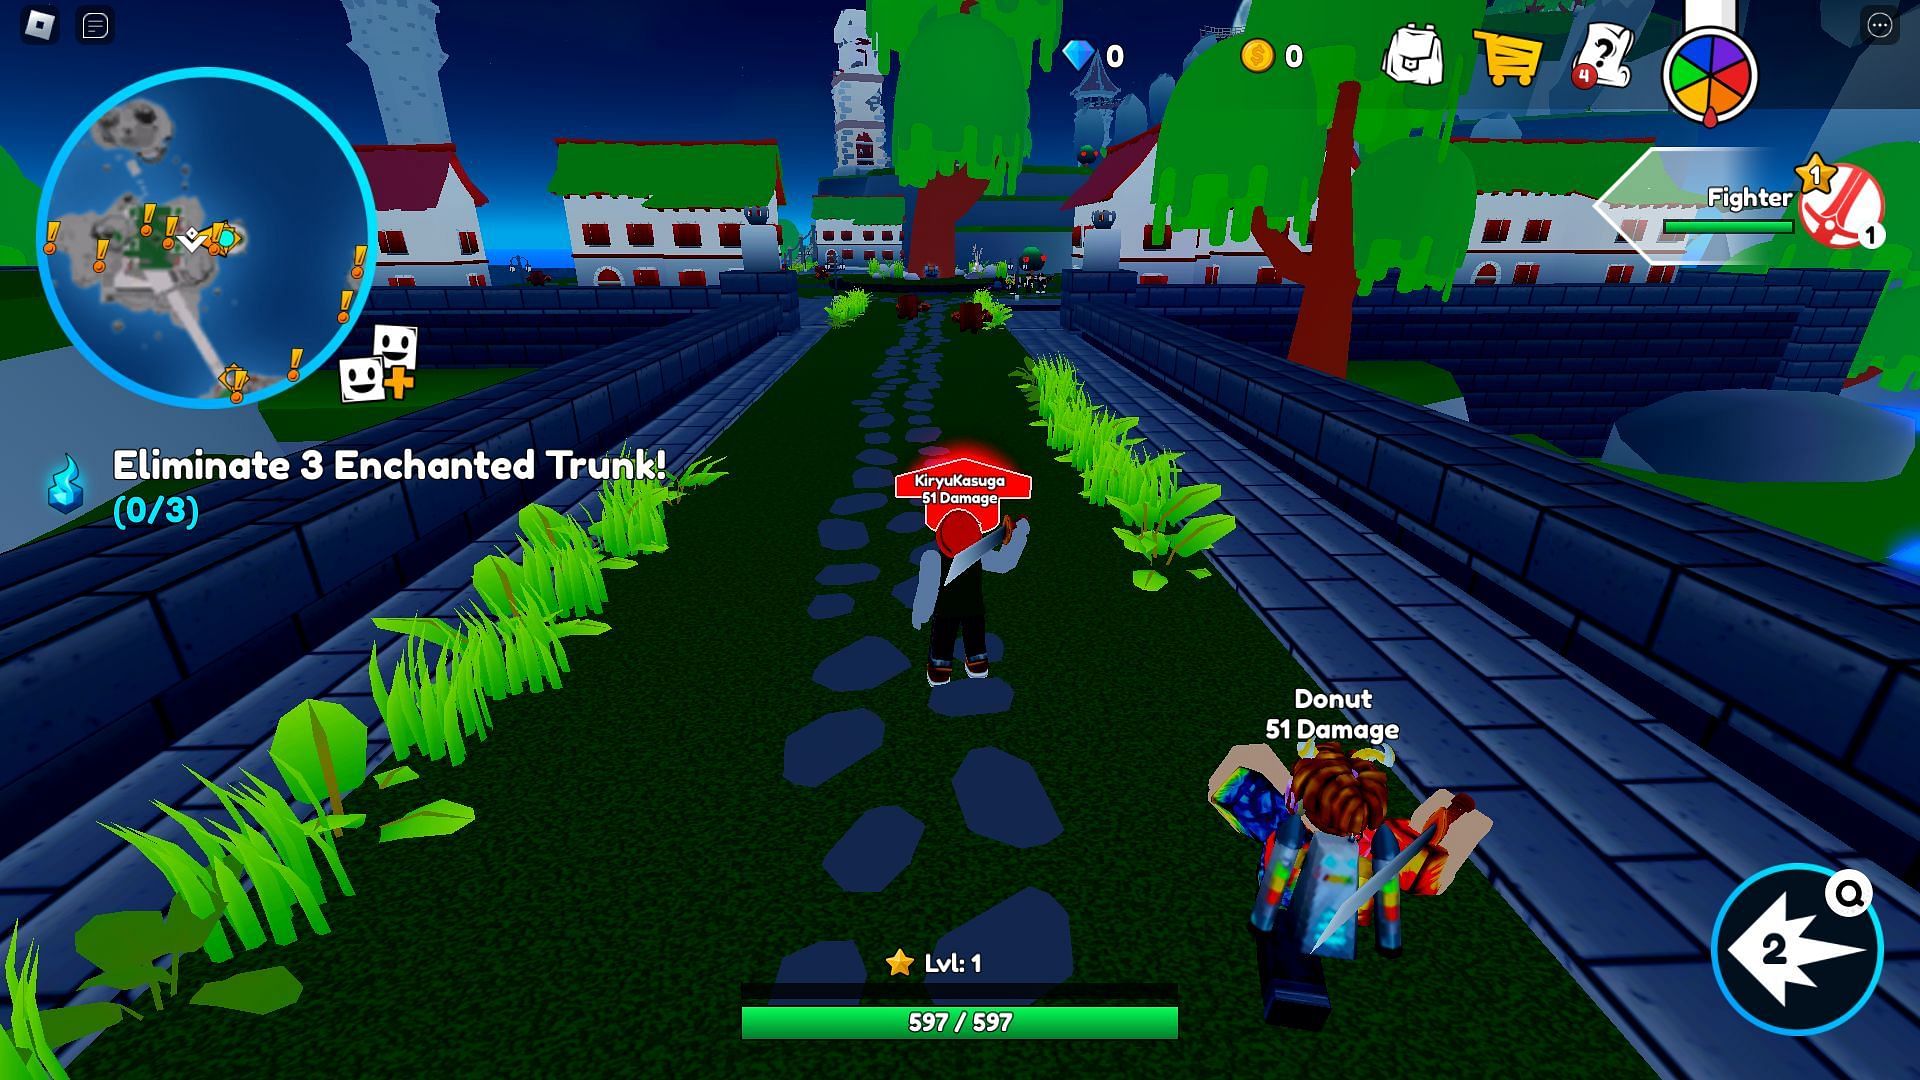 Starting an adventure in the game (Image via Roblox)